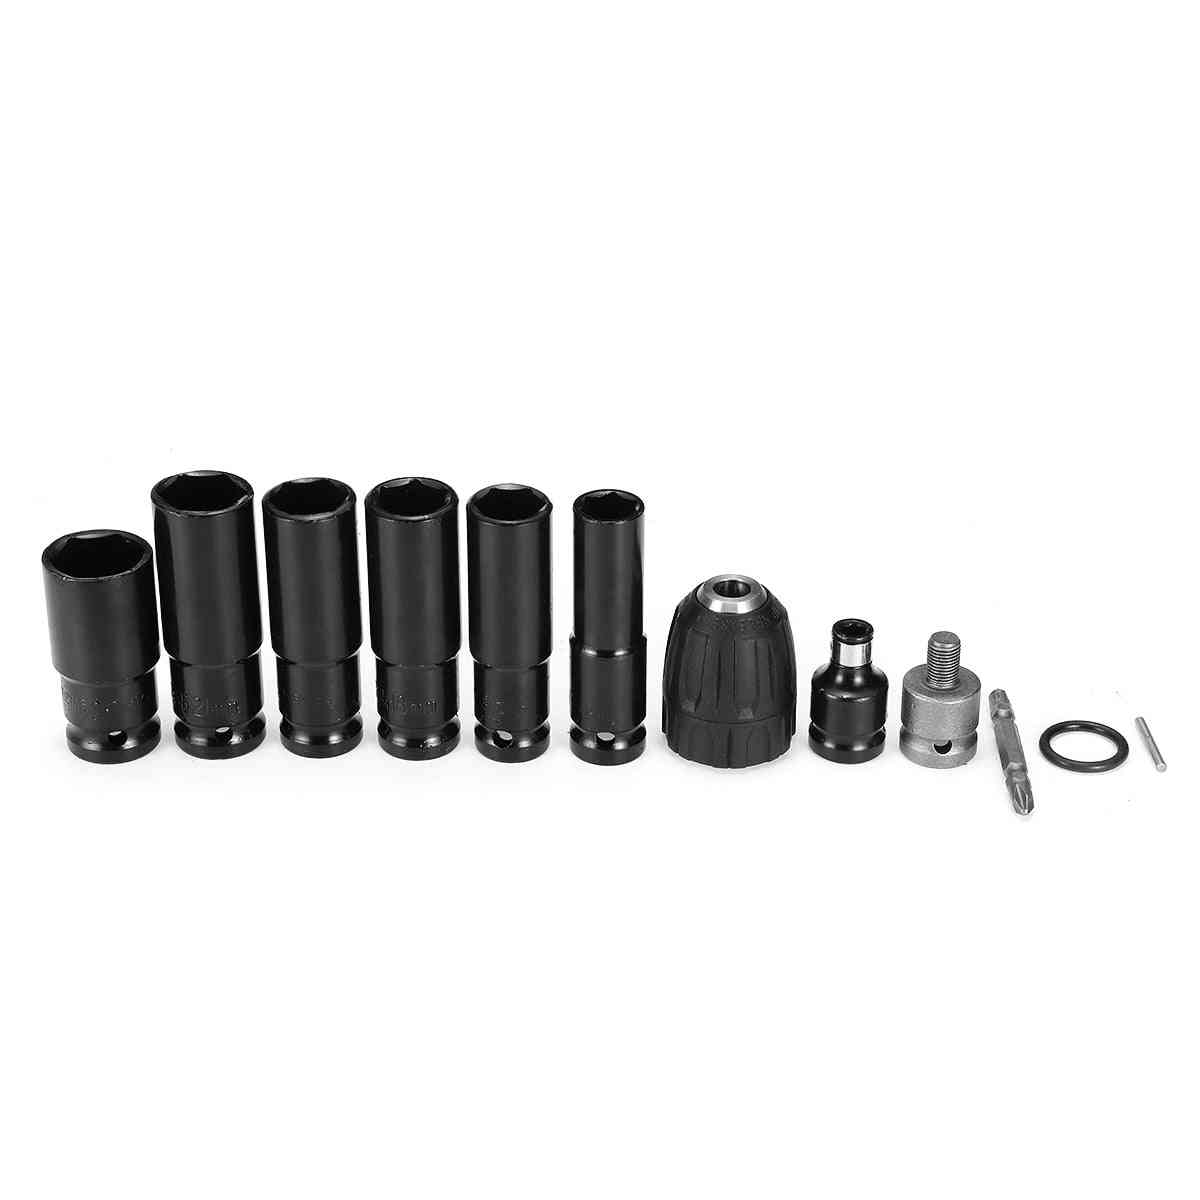 12 In 1 Electric Wrench Screwdriver Hex Socket Head Kits Set